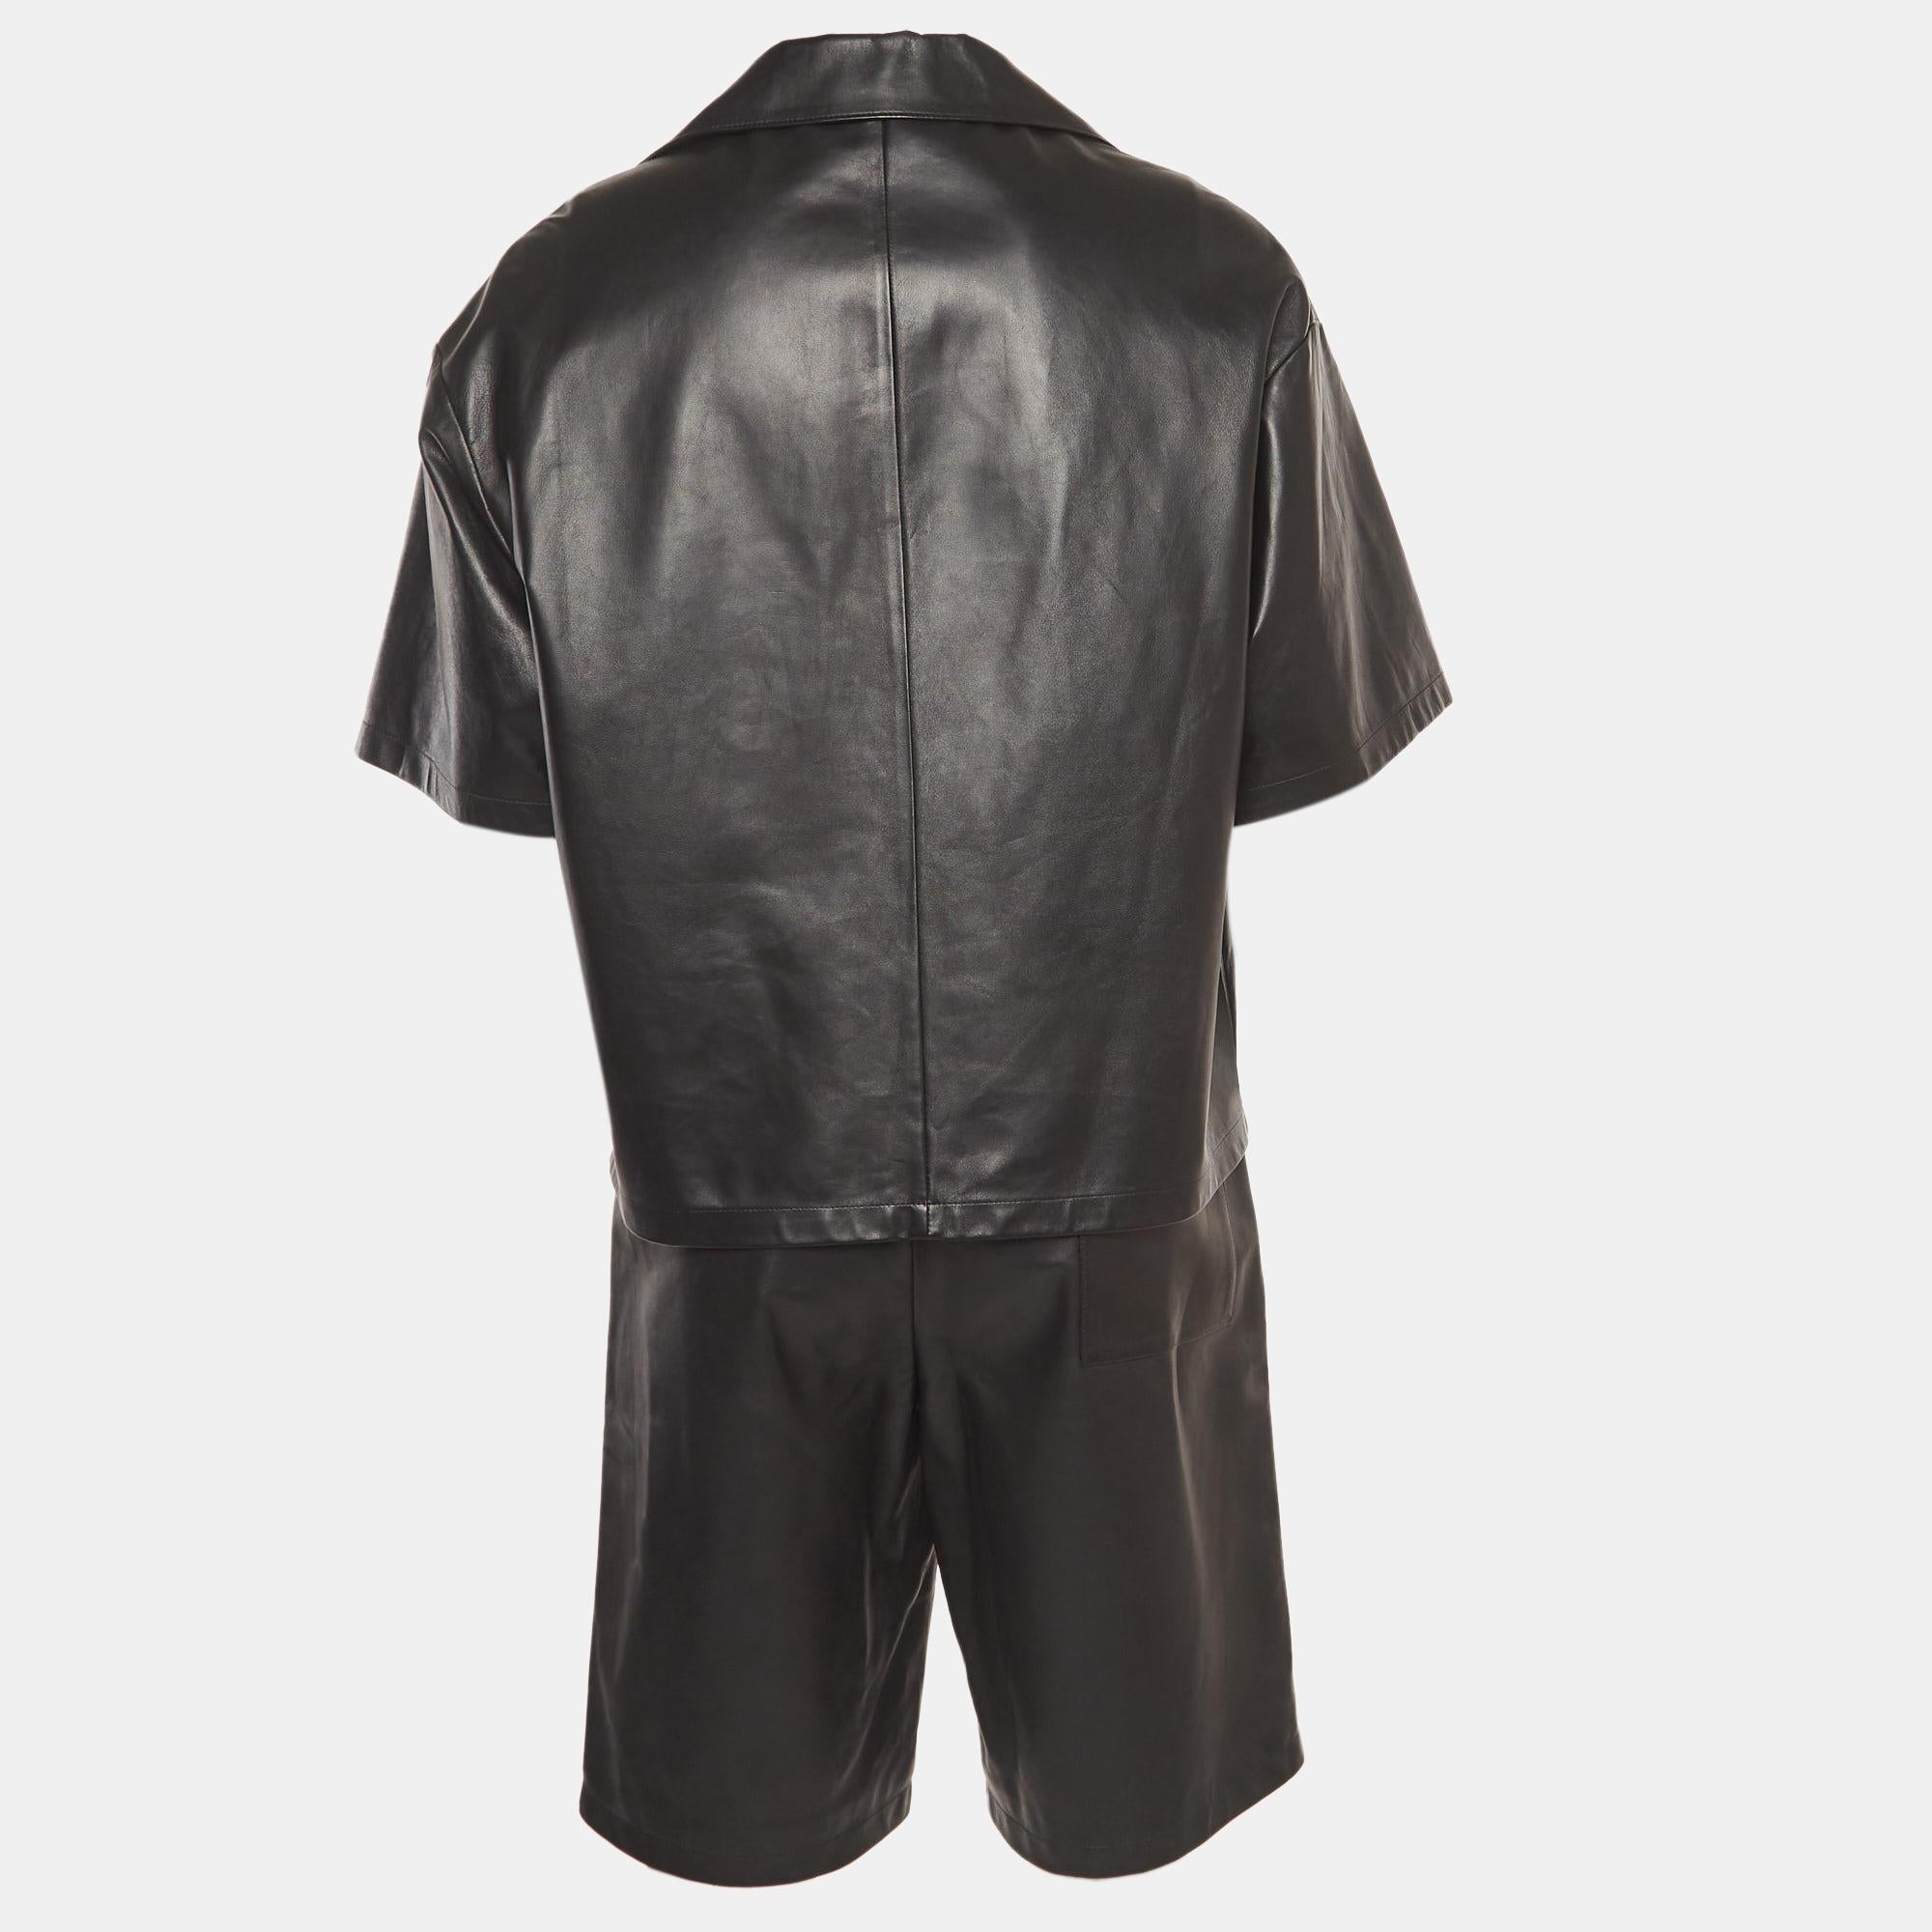 Smart tailoring, high-quality leather, and enduring comfort & style are delivered by this Prada set of shorts and shirt. The set comes in black and the collar shirt has the triangular brand logo.

